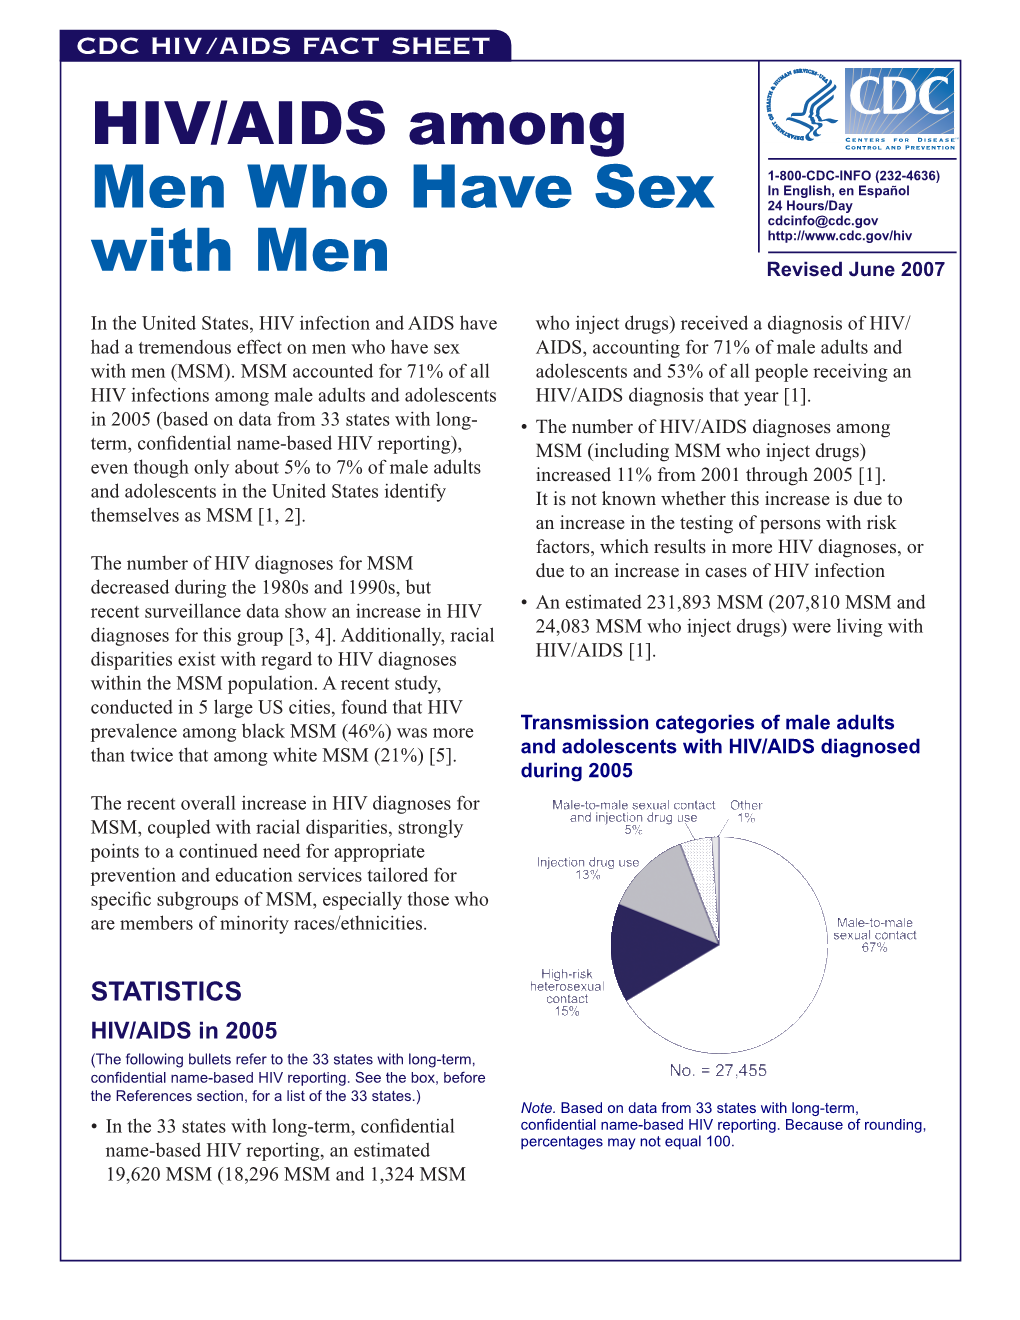 HIV/AIDS Among Men Who Have Sex with Men